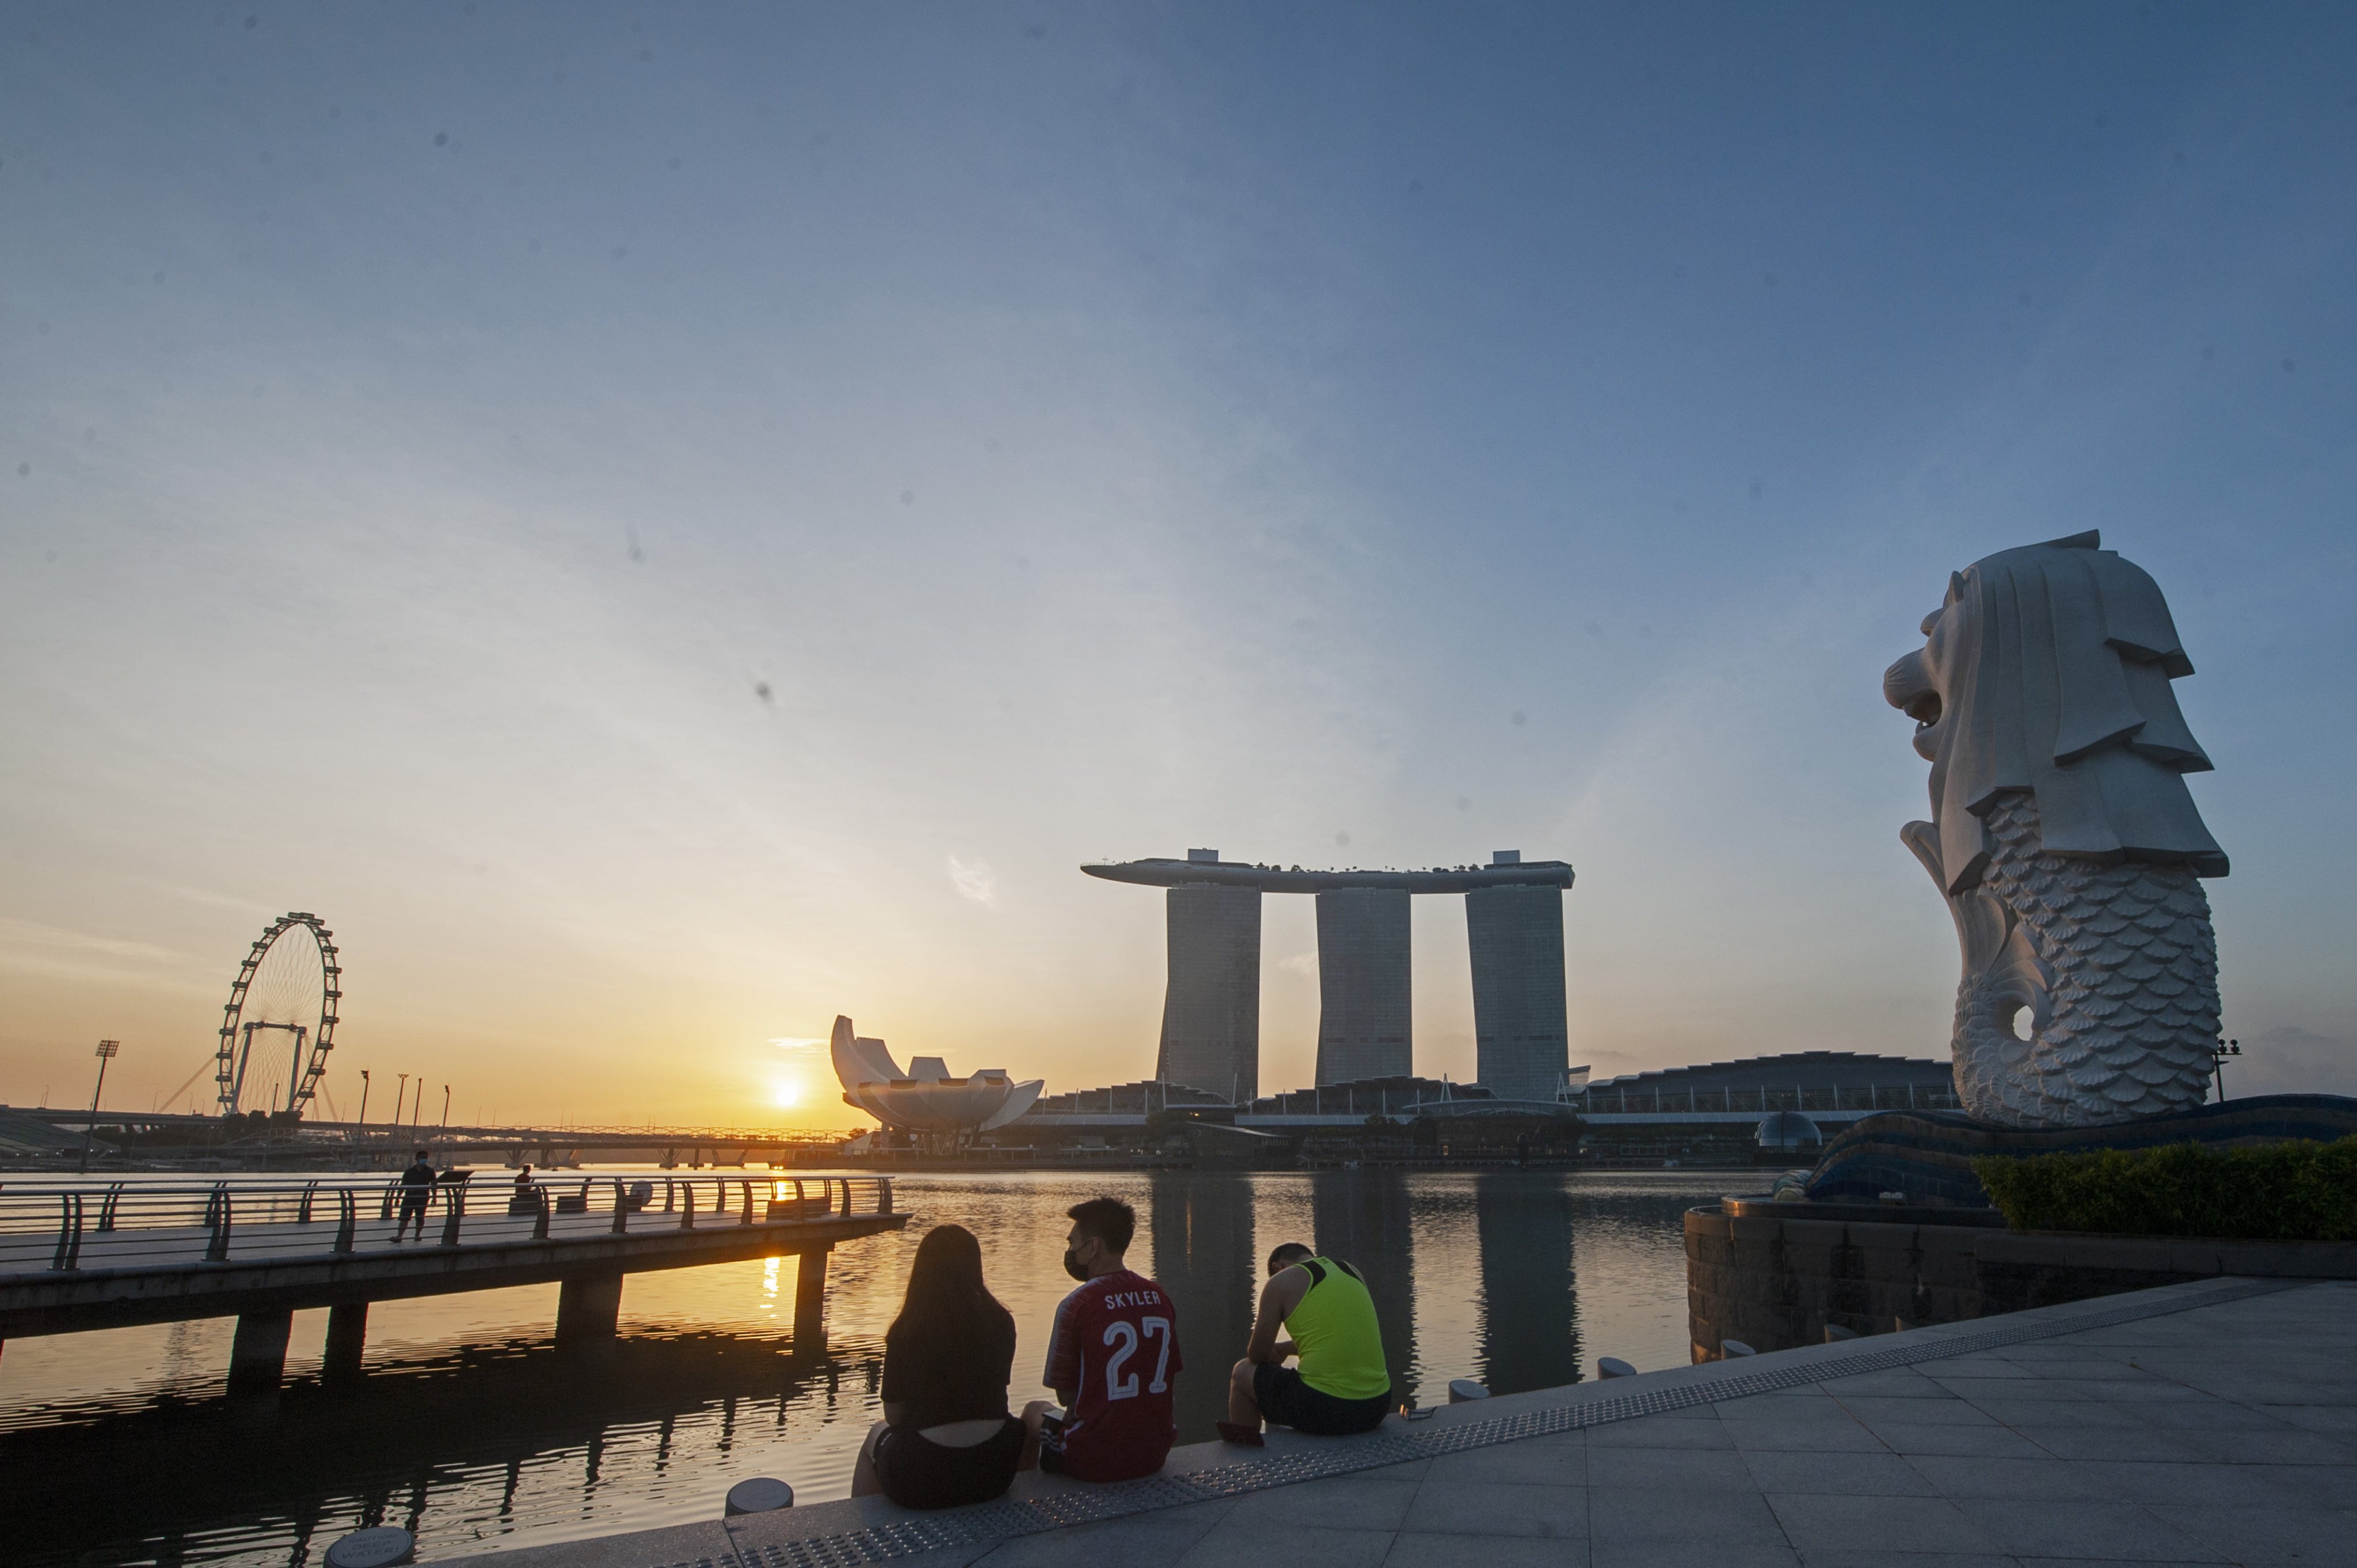 Singapore is set to ease some social-distancing rules following success in lowering its Covid-19 caseload. Photo: Xinhua